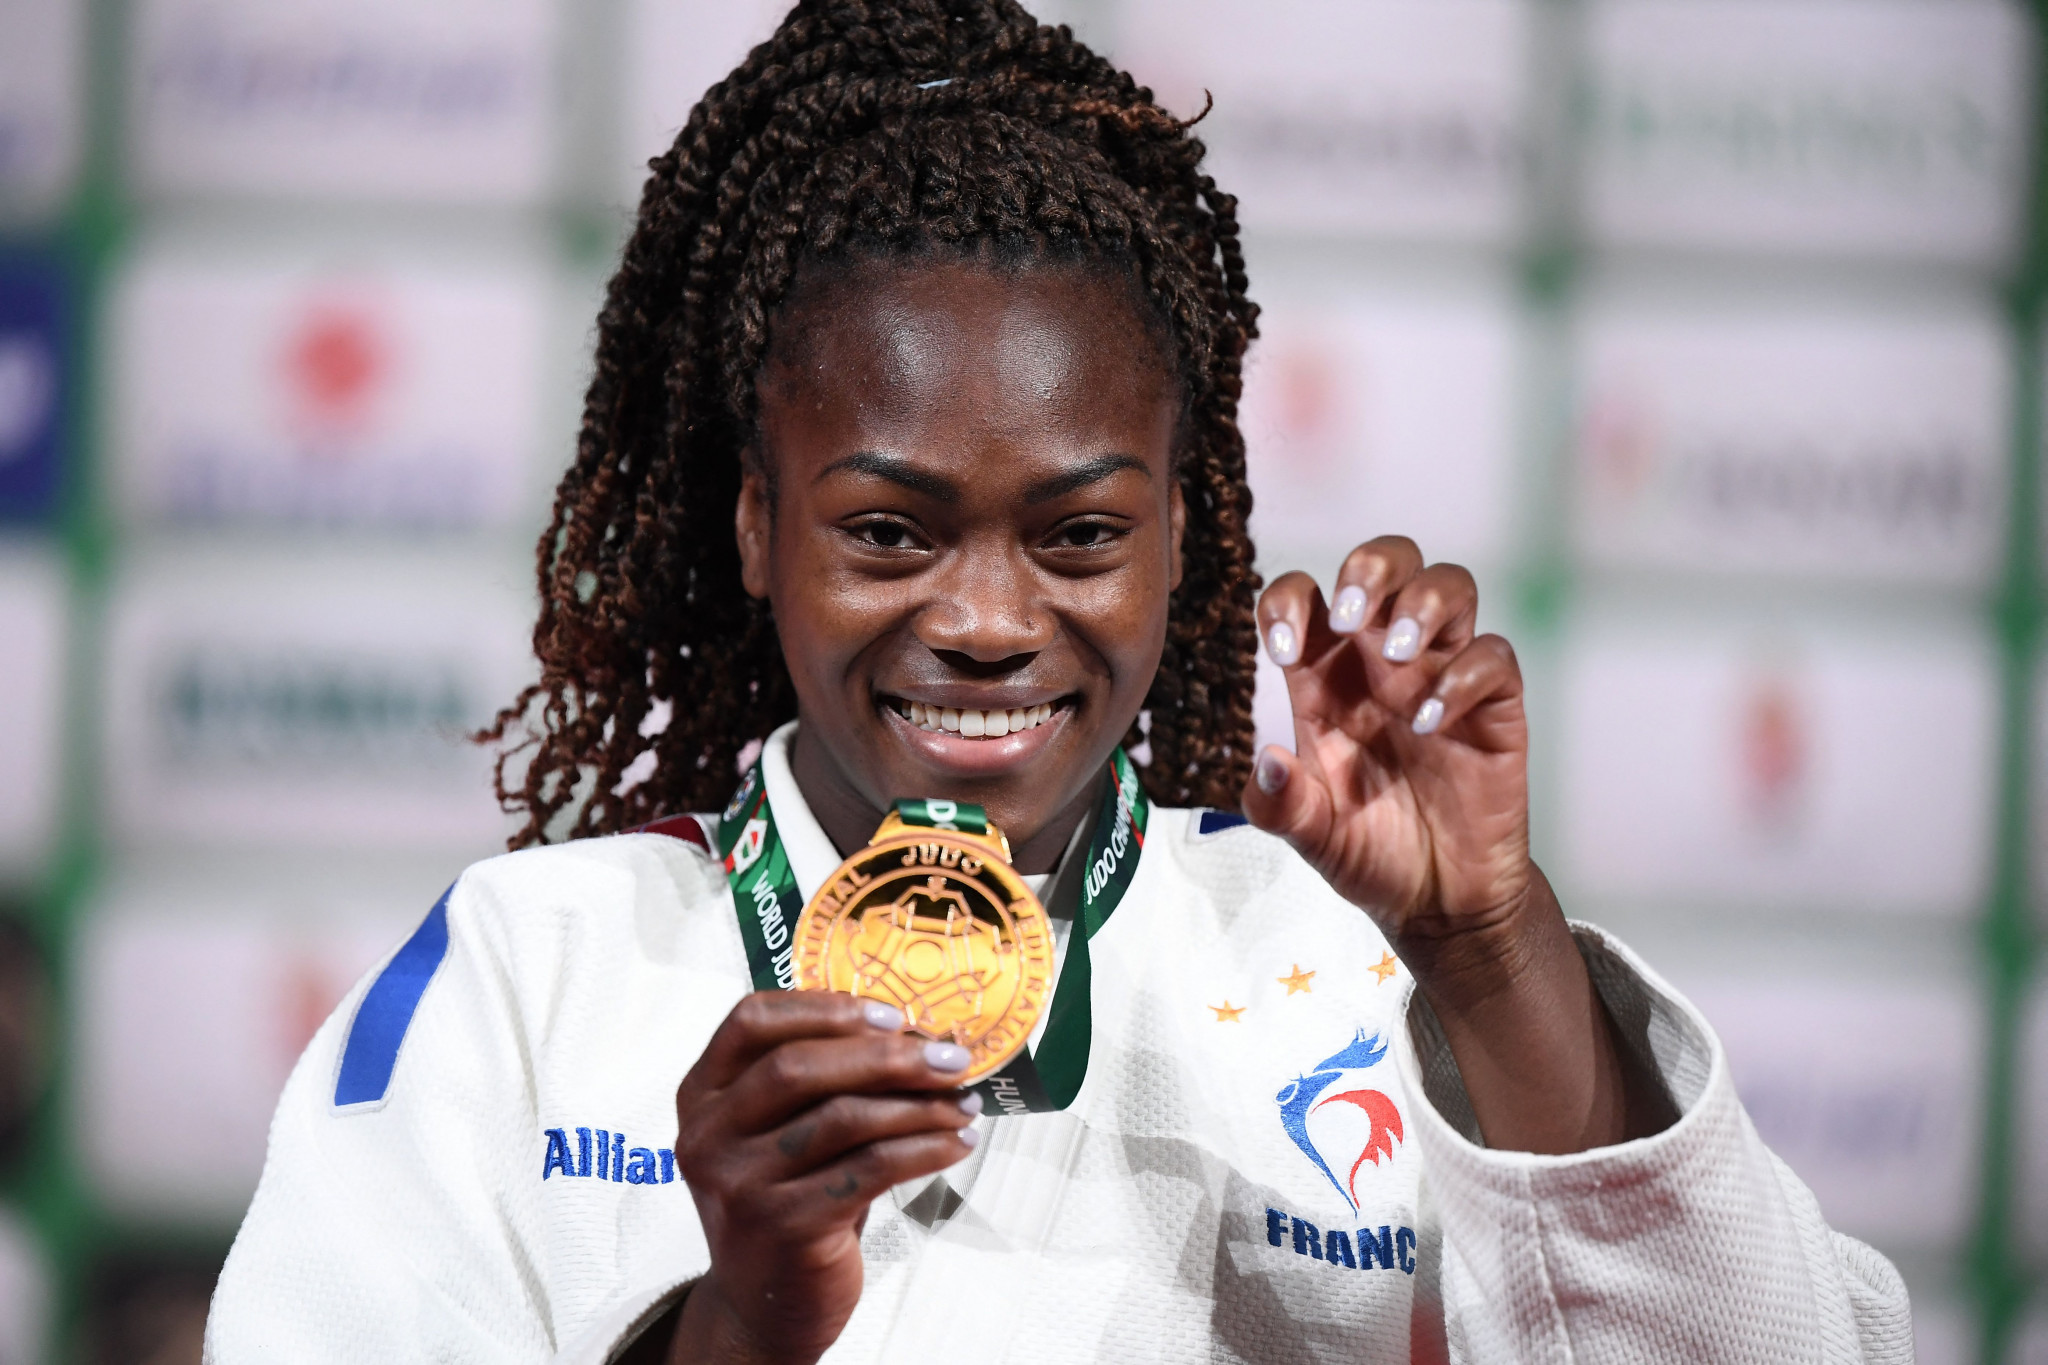 French judo star Agbegnenou plans to take year-long break after Tokyo 2020